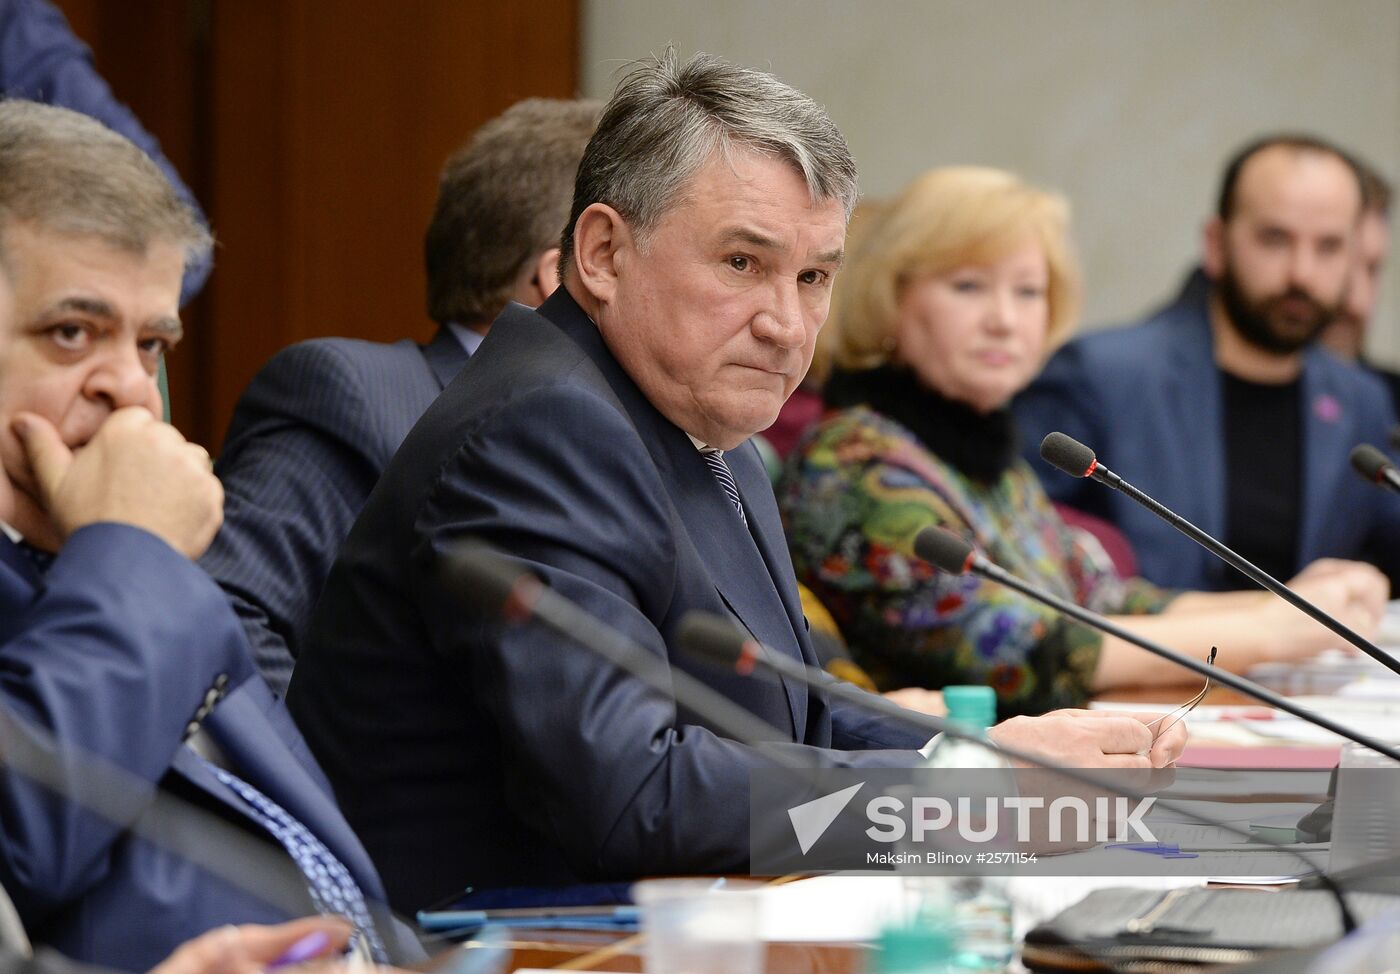 Meeting of Committee for Public Support of Southeastern Ukraine Residents